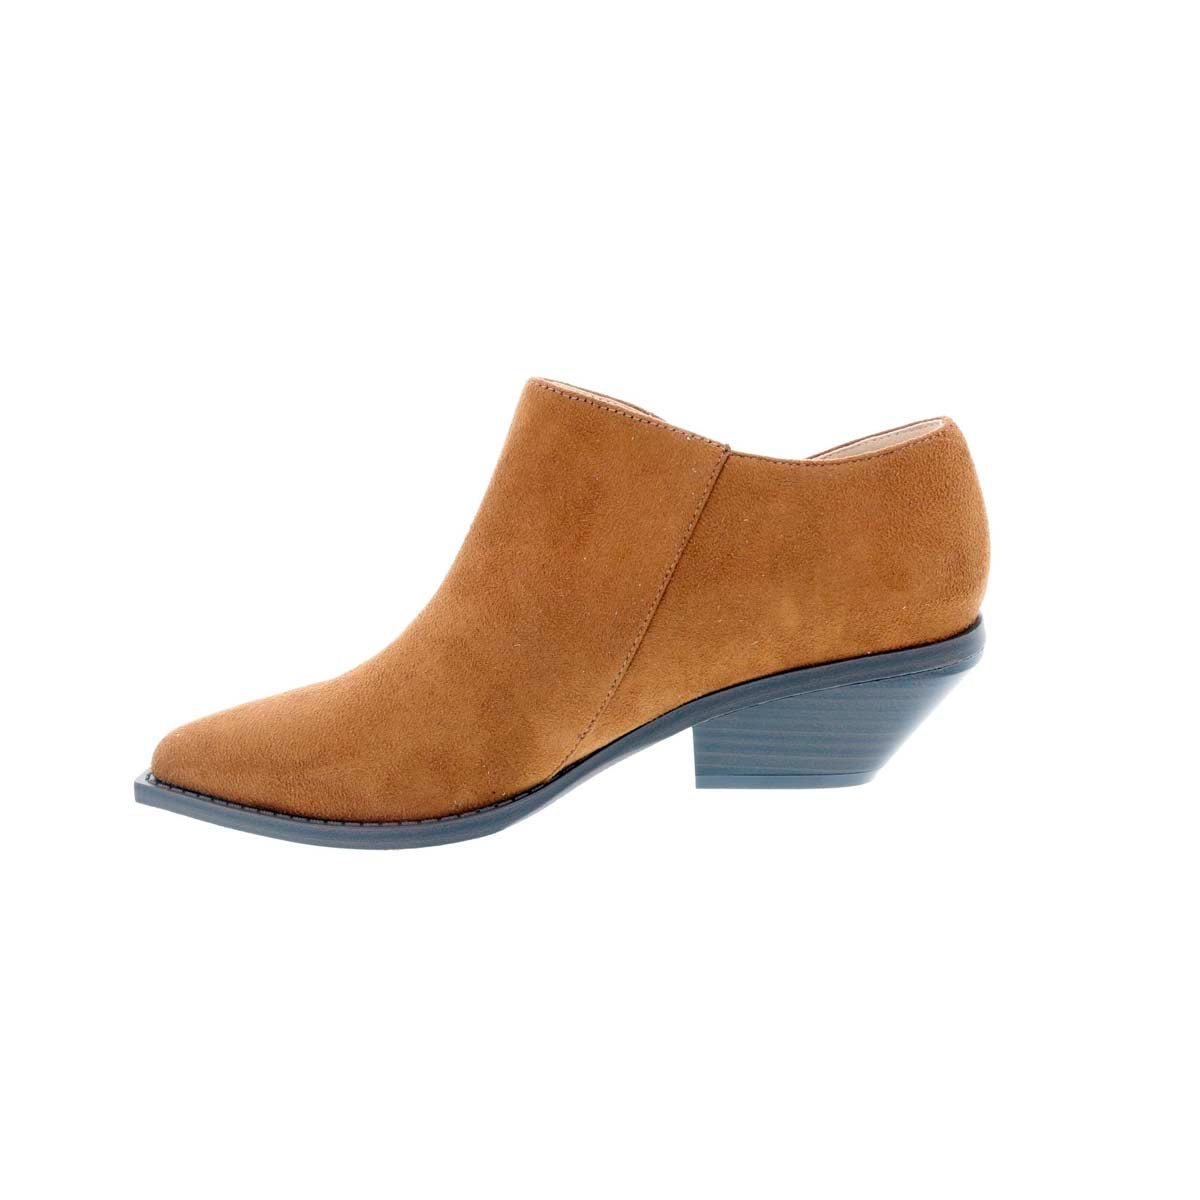 PENNY LOVES KENNY SYNC WOMEN BOOTIE IN LT. BROWN MICROSUEDE - TLW Shoes